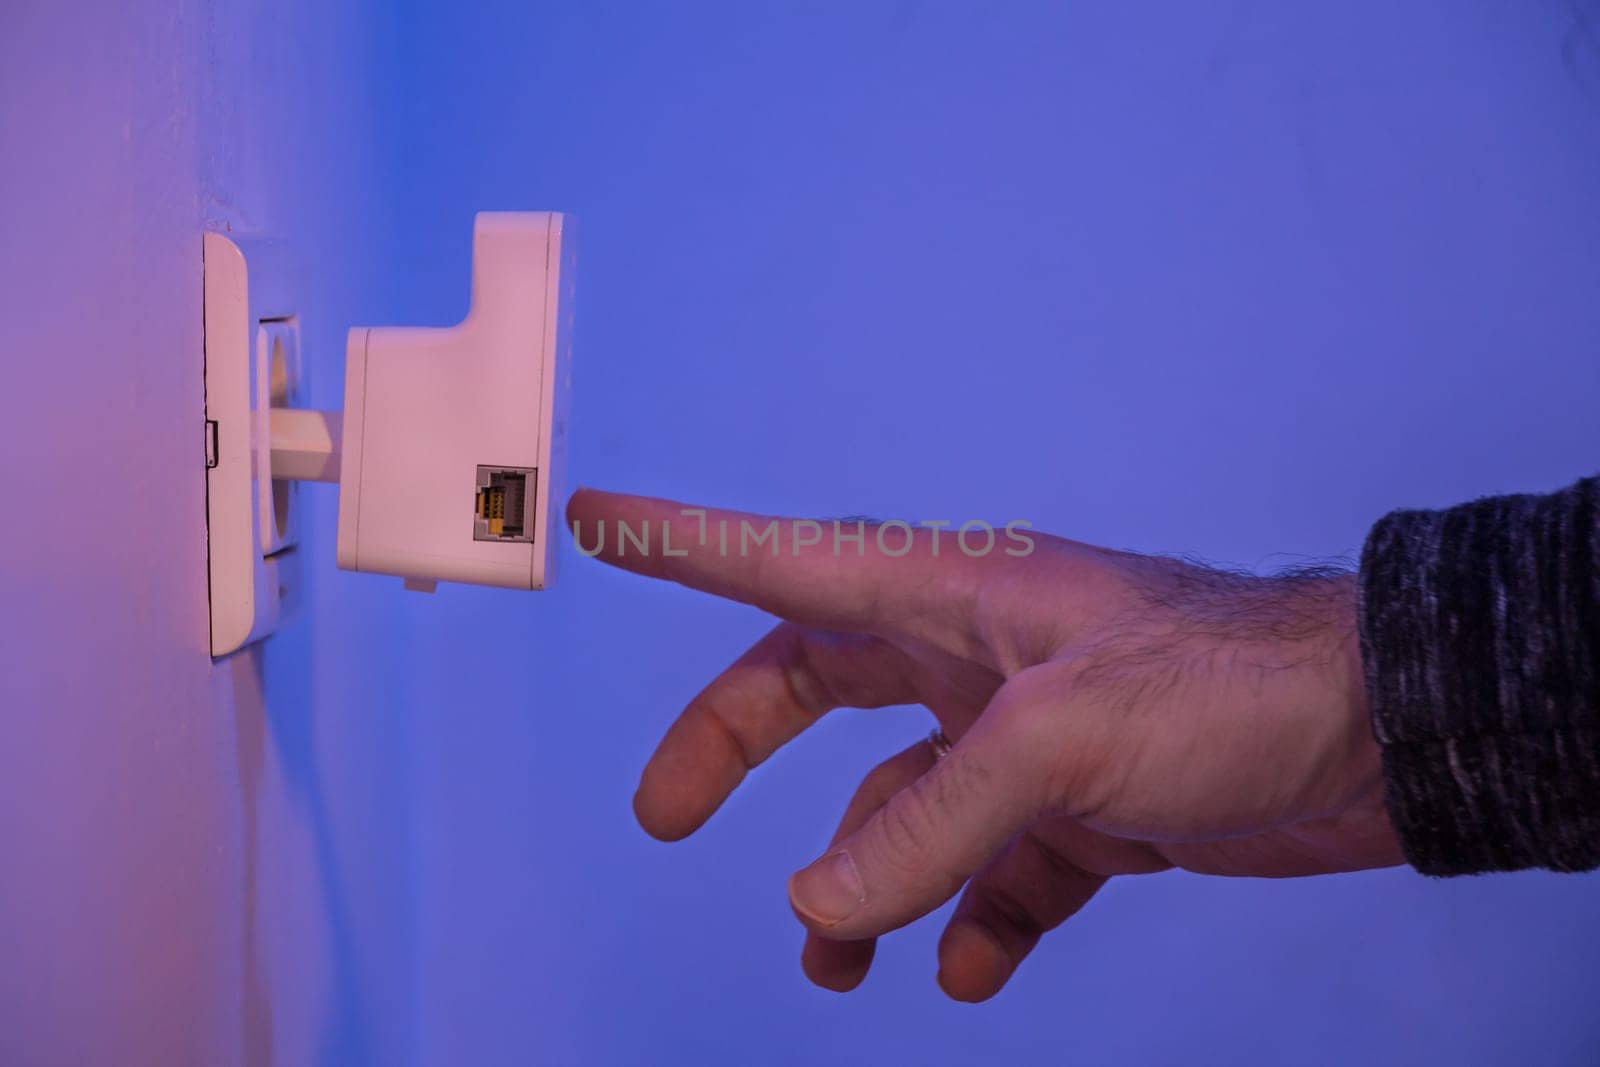 Man press with his finger on WPS button on WiFi repeater which is in electrical socket on the wall by wavemovies